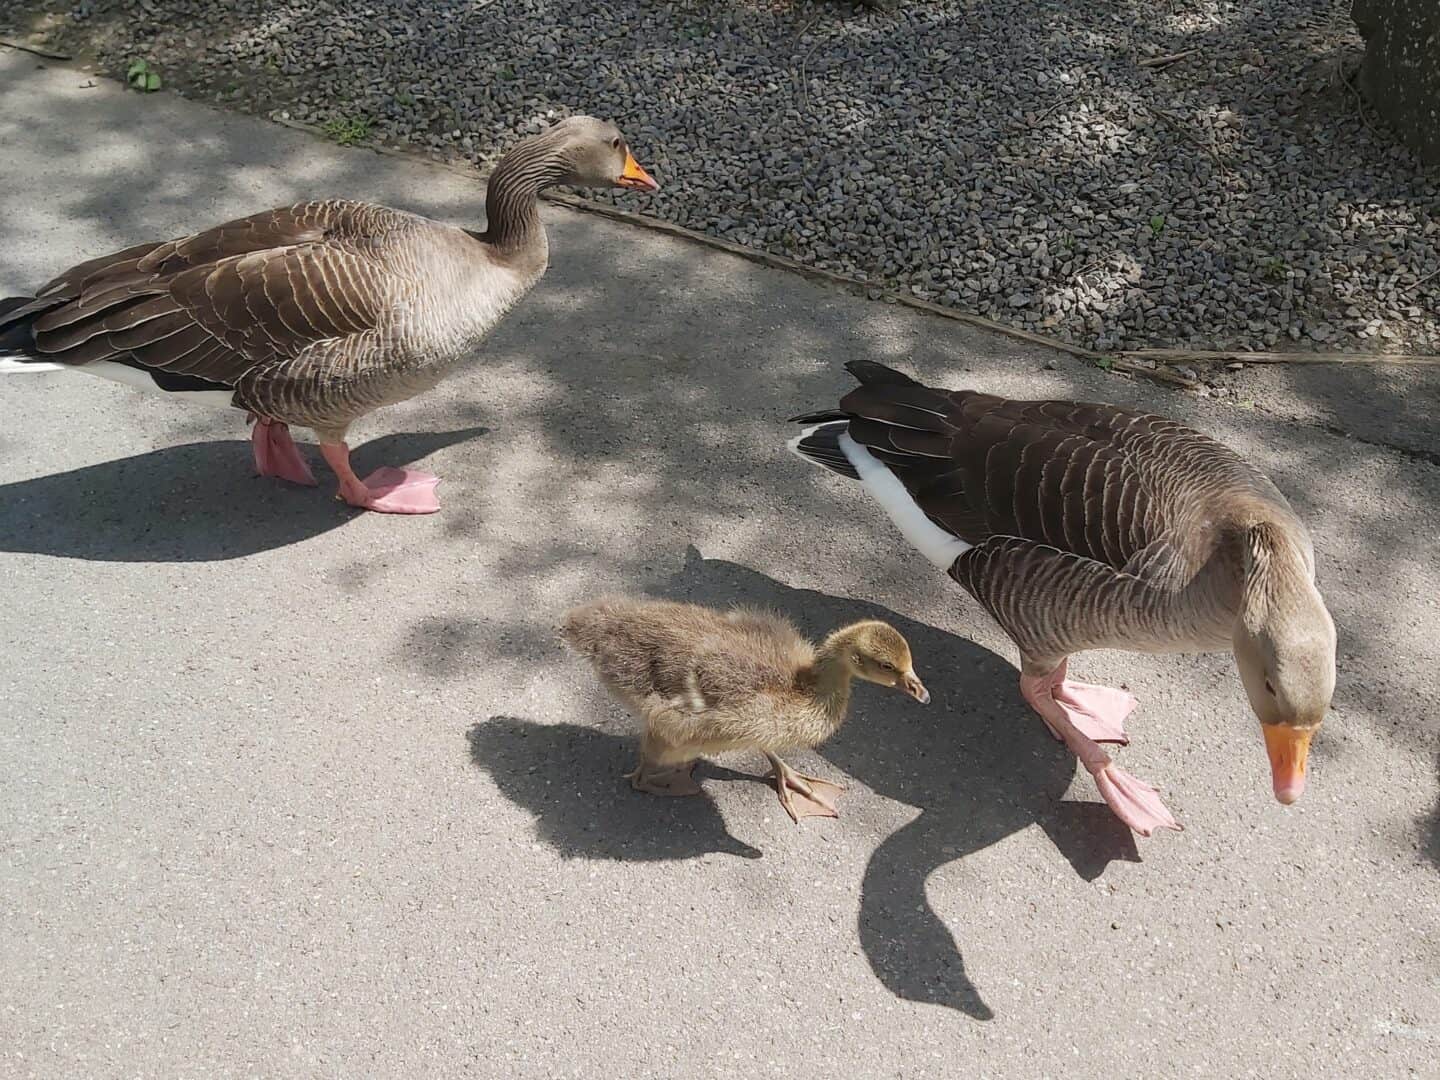 Two adult geese and a gosling